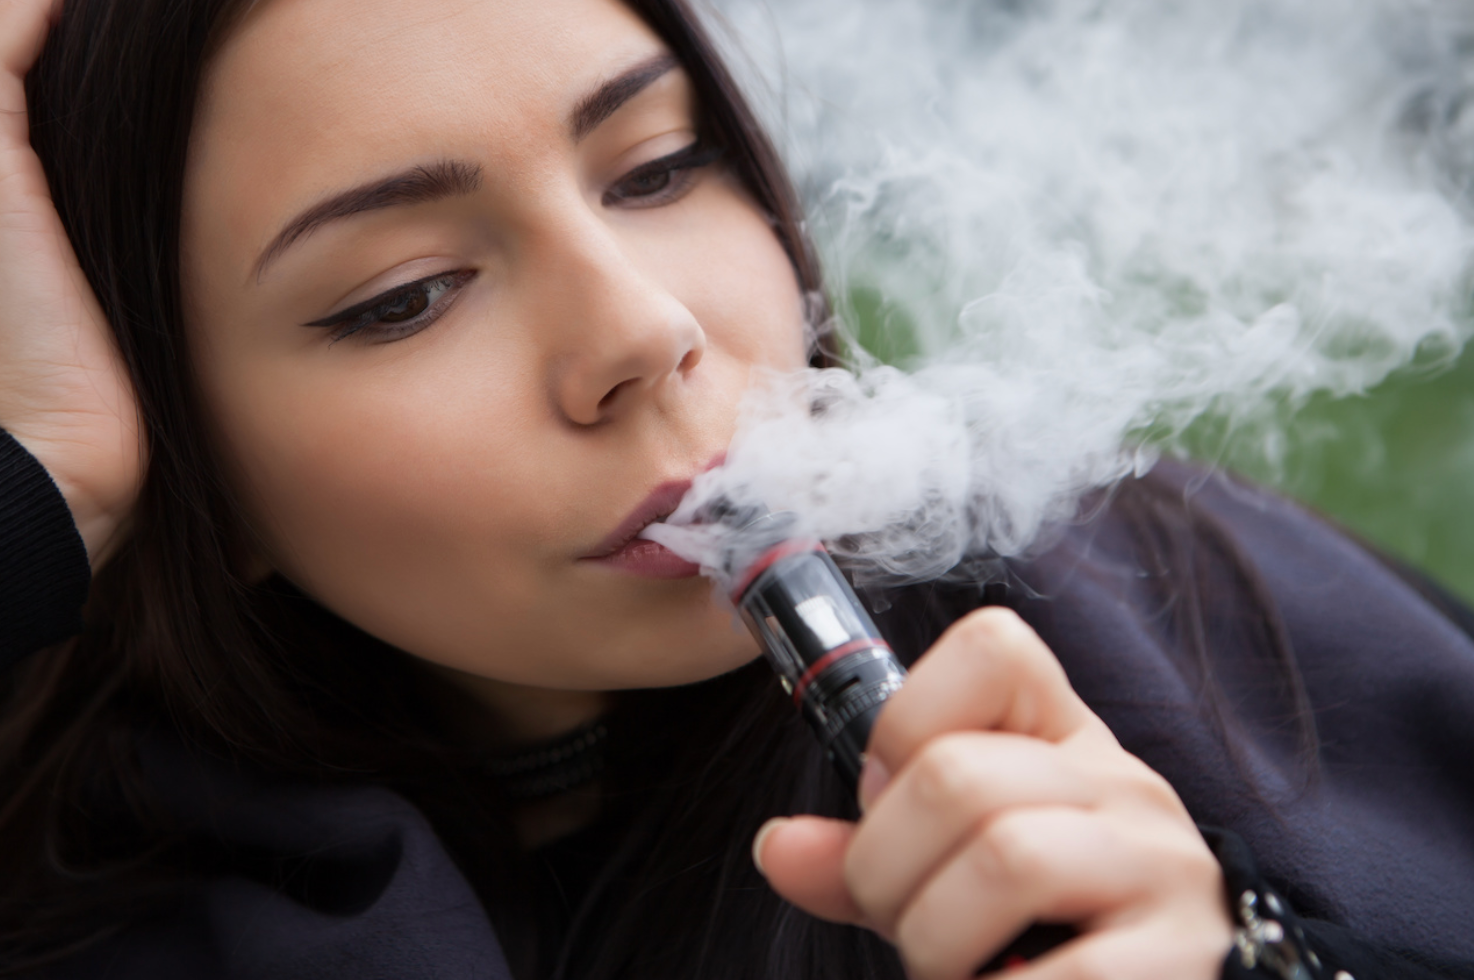 Teens, Adults Who Use E-Cigarettes Have Increased Odds of Asthma, Asthma Attacks